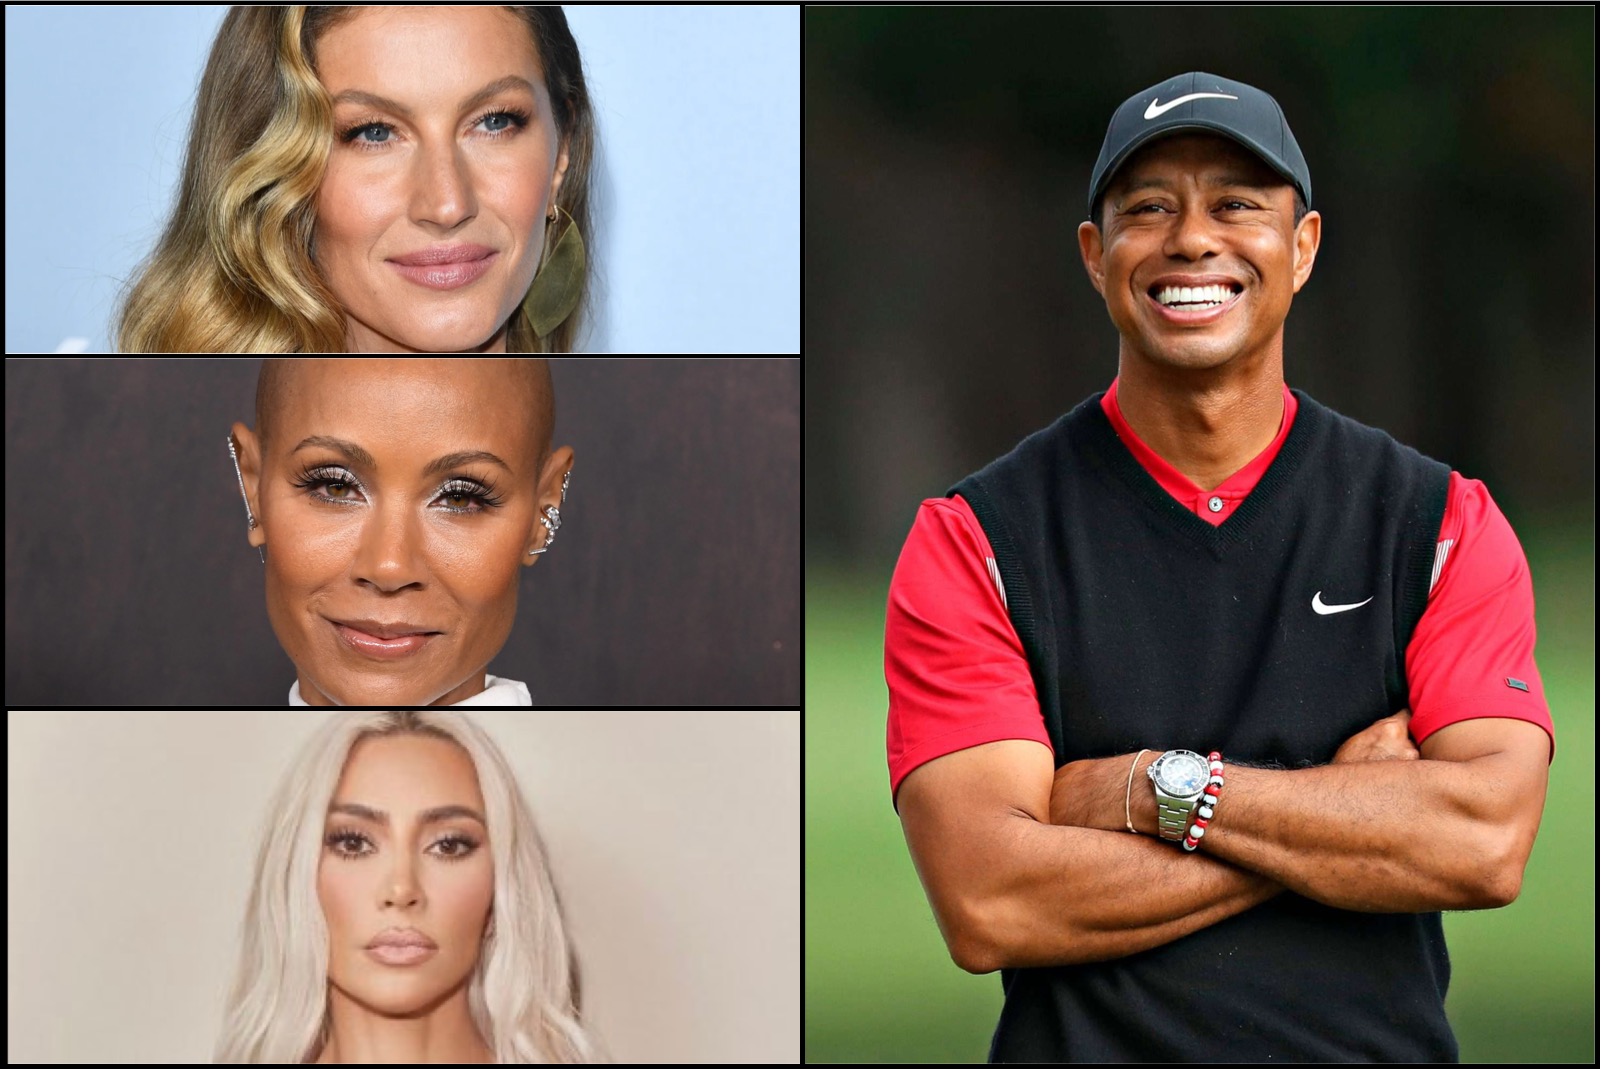 Gisele Bundchen favorite to be Tiger Woods' next girlfriend with